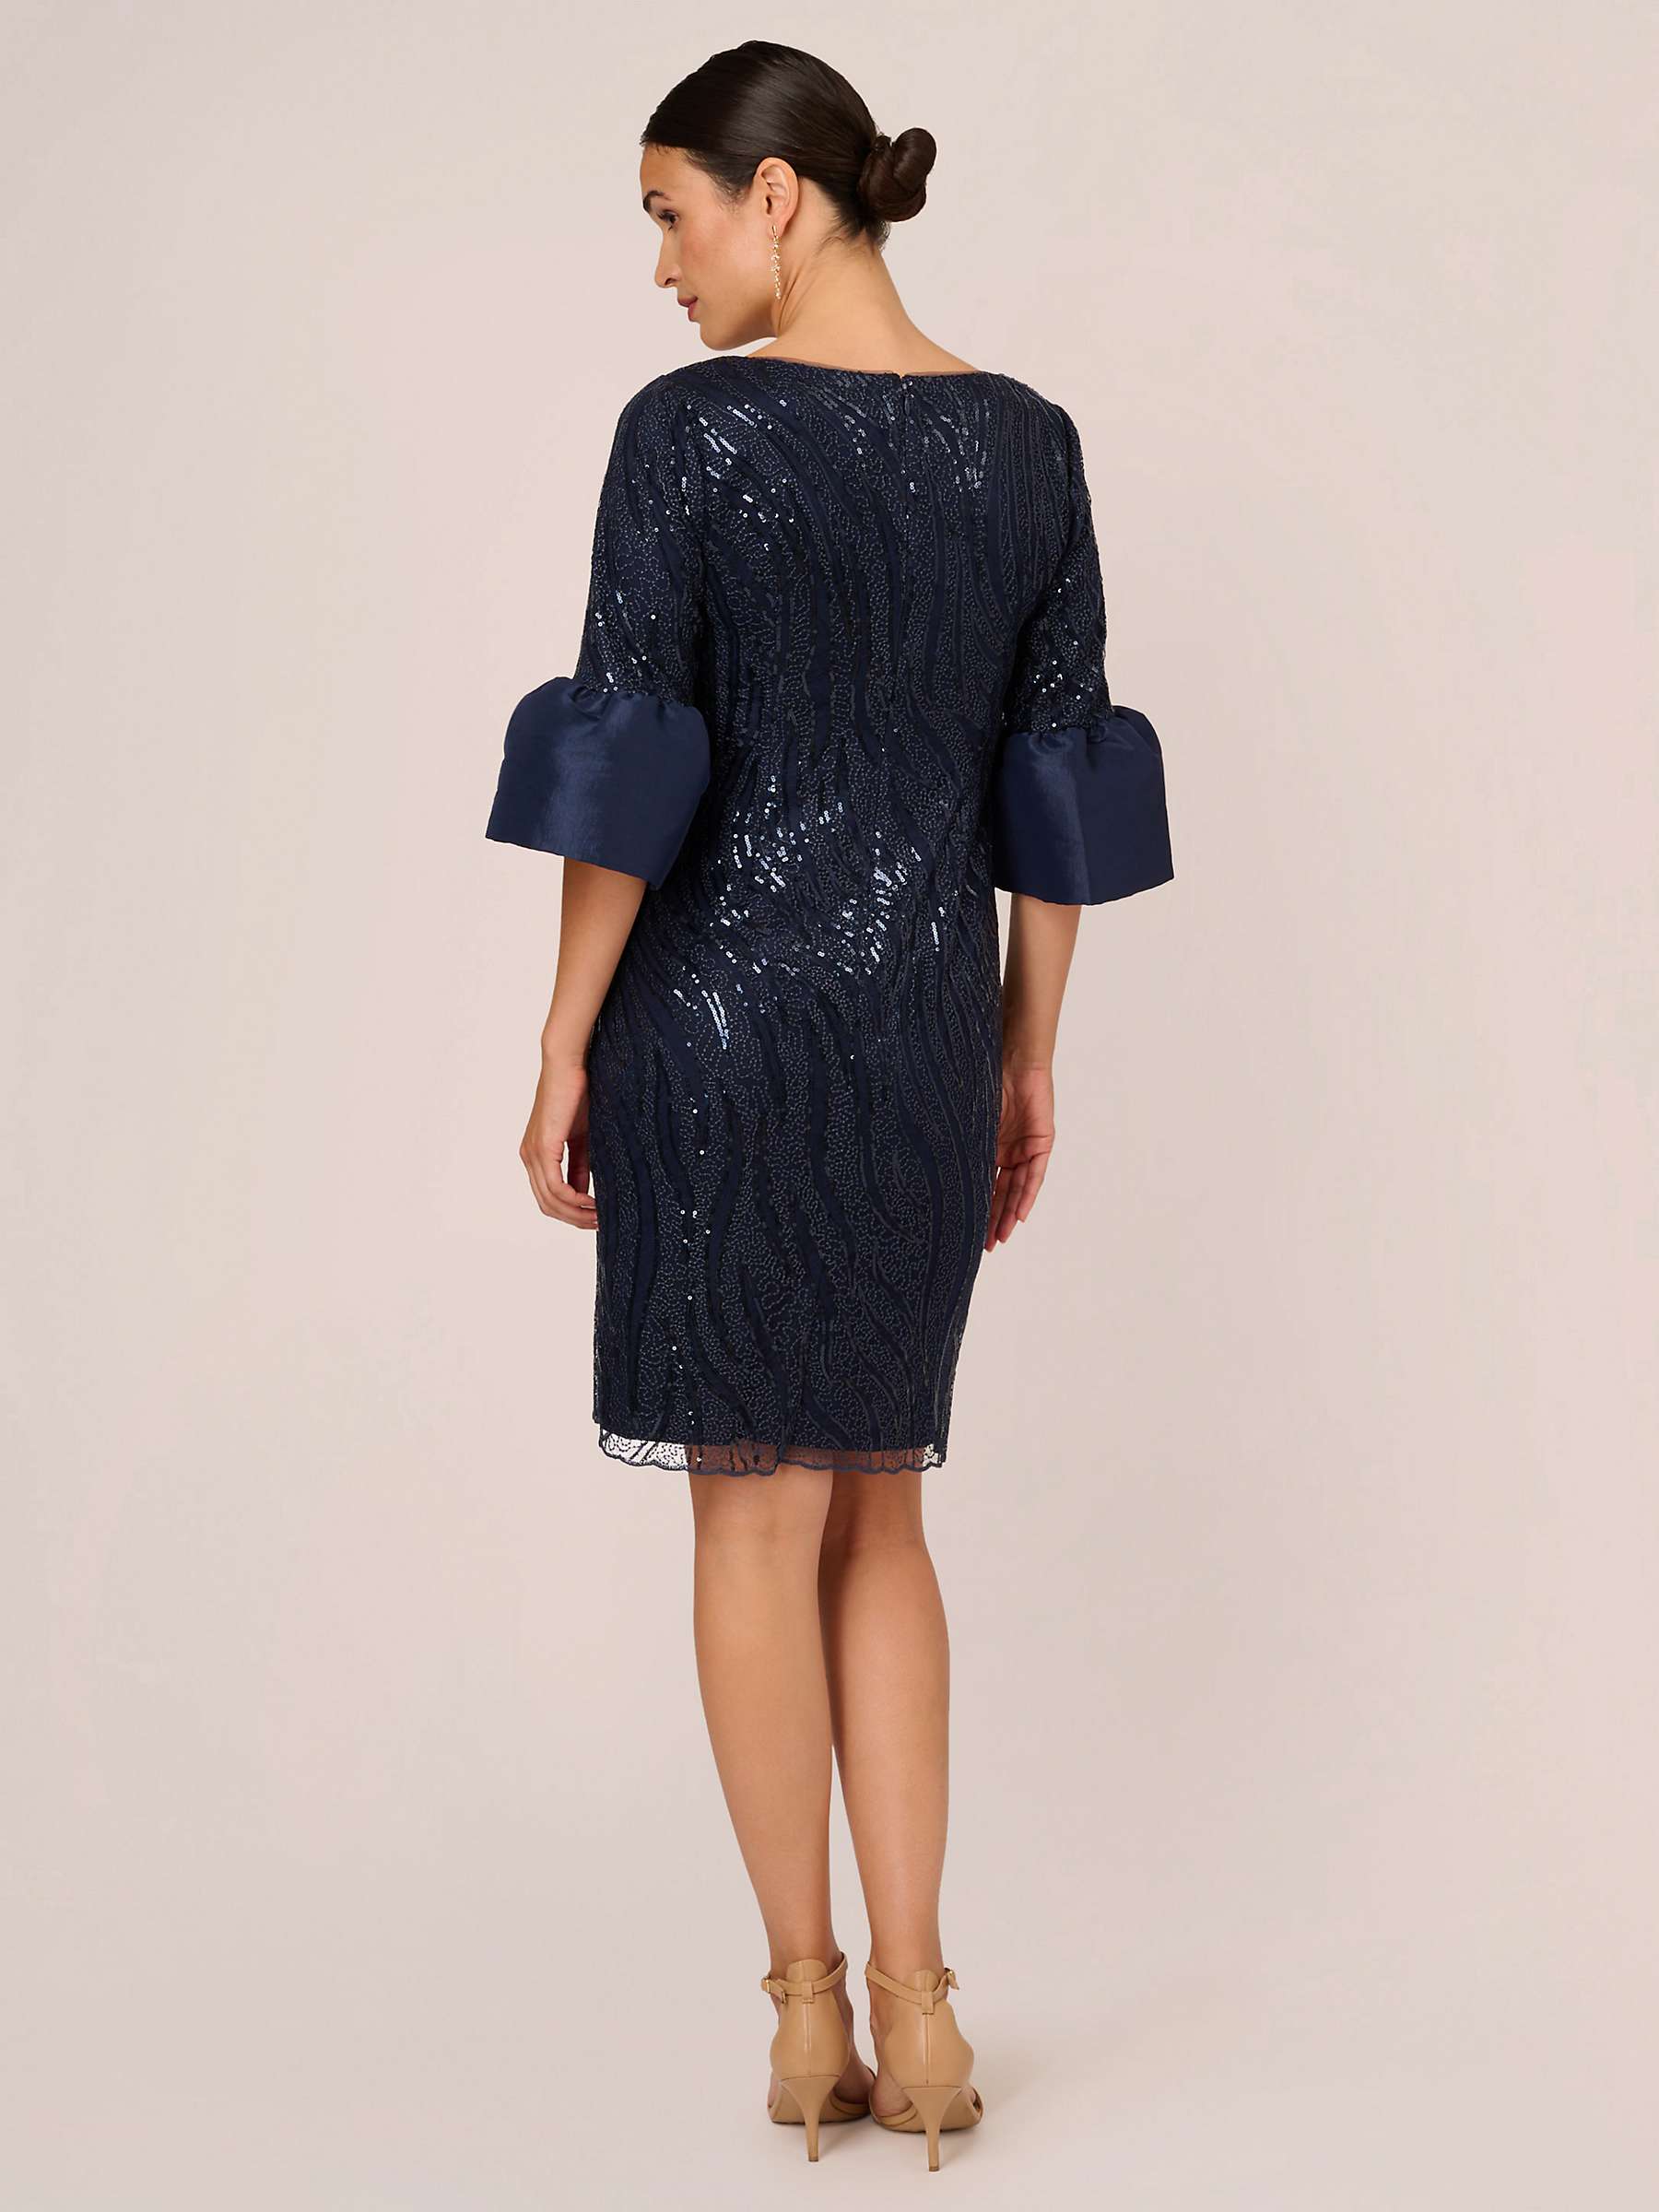 Buy Adrianna Papell Embroidered Bell Sleeve Dress, Midnight Online at johnlewis.com